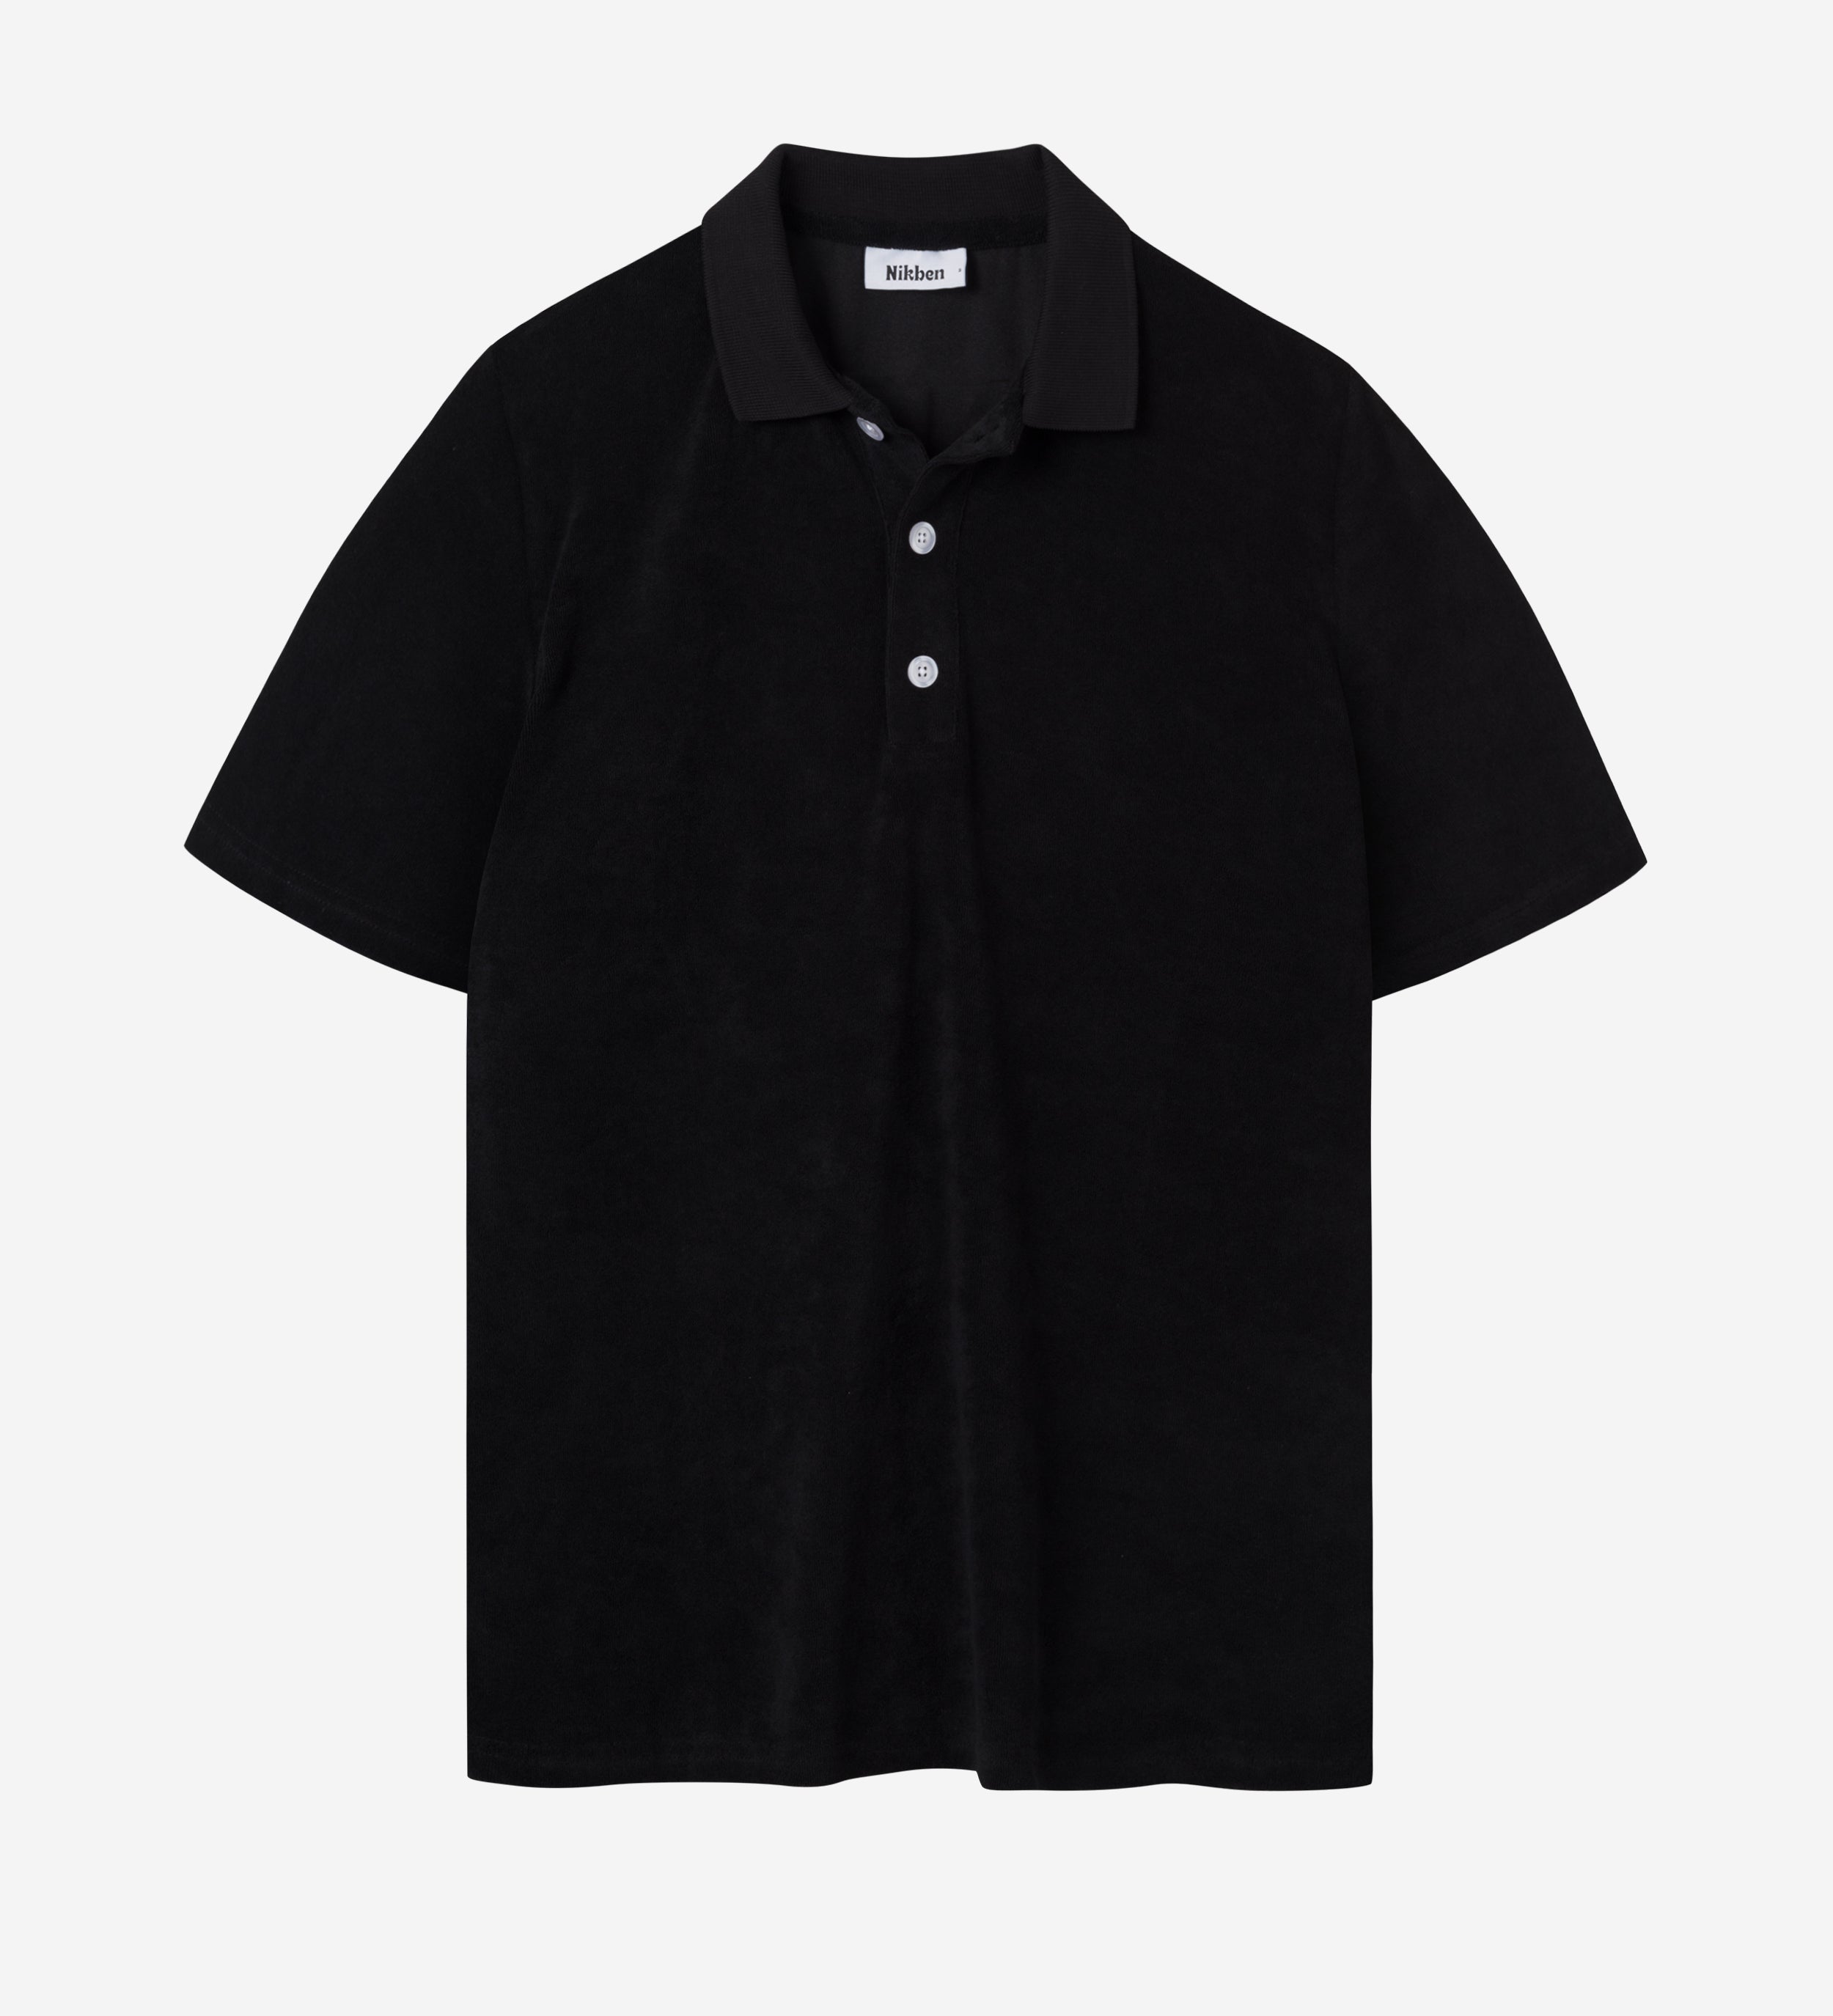 Black short sleeve piké shirt in terry toweling fabric.